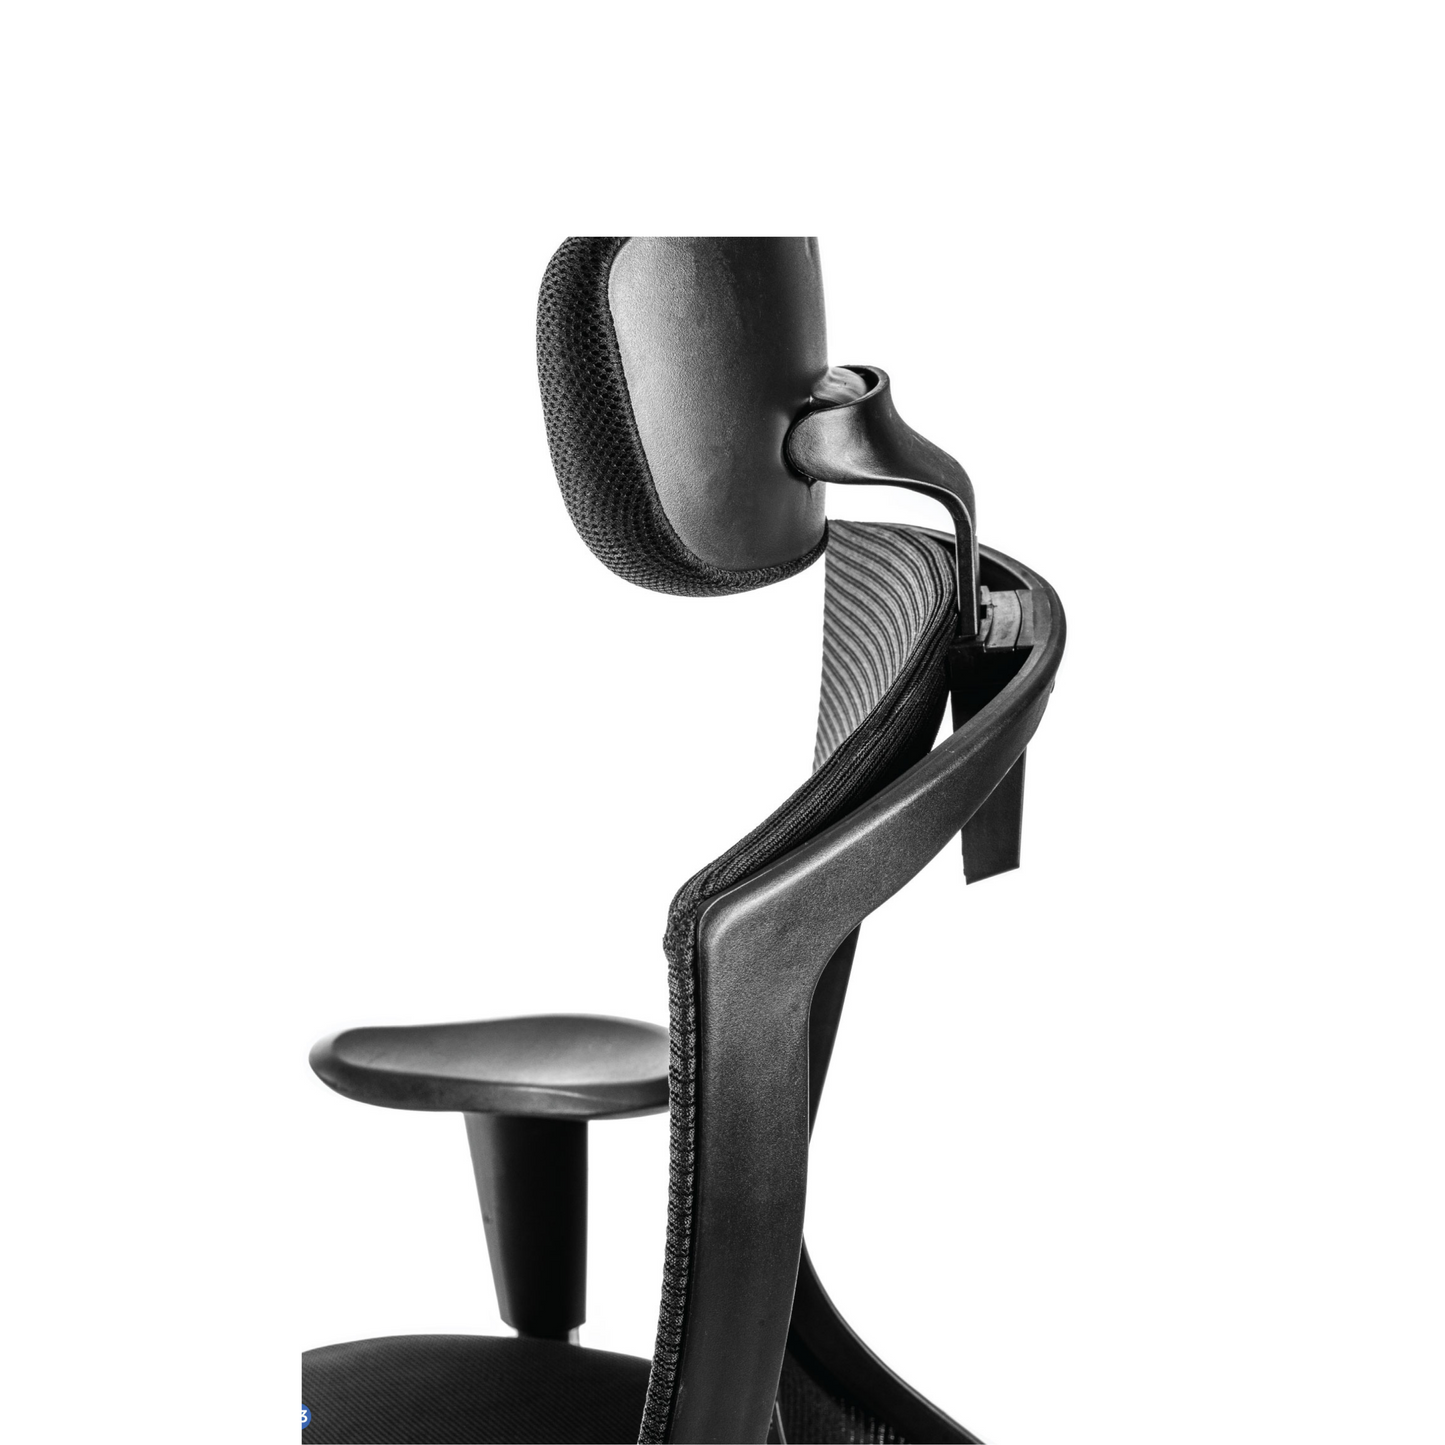 Office Chair KP - TANG HB FX | Buy Office Chair online